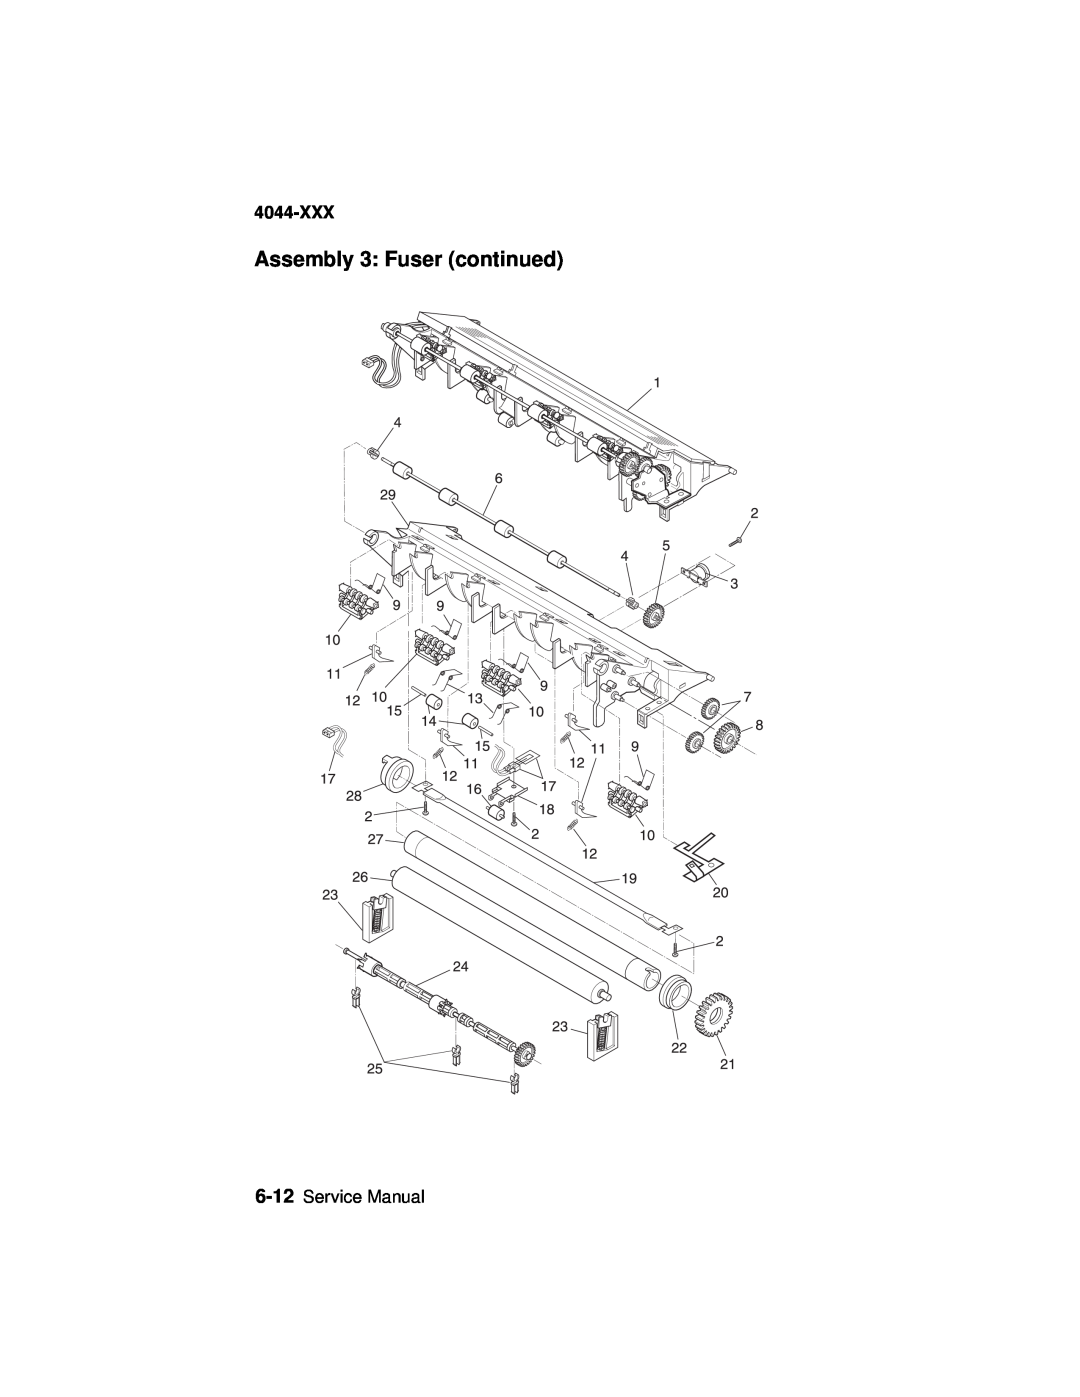 Lexmark 4044-XXX, E310 manual Assembly 3: Fuser continued, Service Manual 